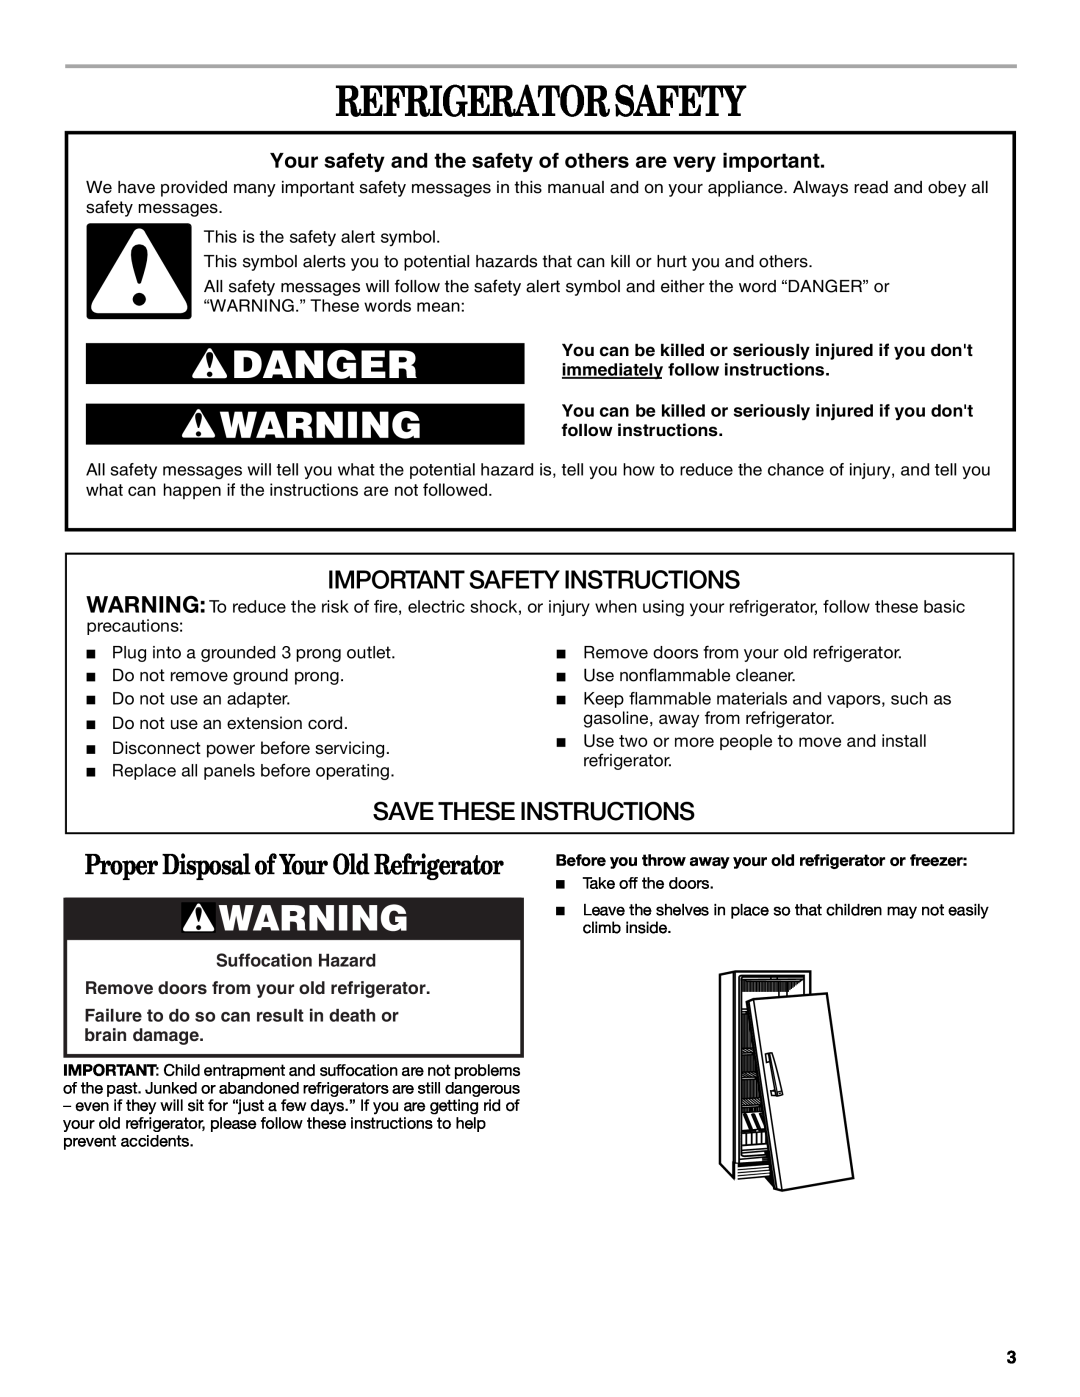 Whirlpool EL7ATRRKB00 manual Refrigerator Safety, Proper Disposal of Your Old Refrigerator, Important Safety Instructions 